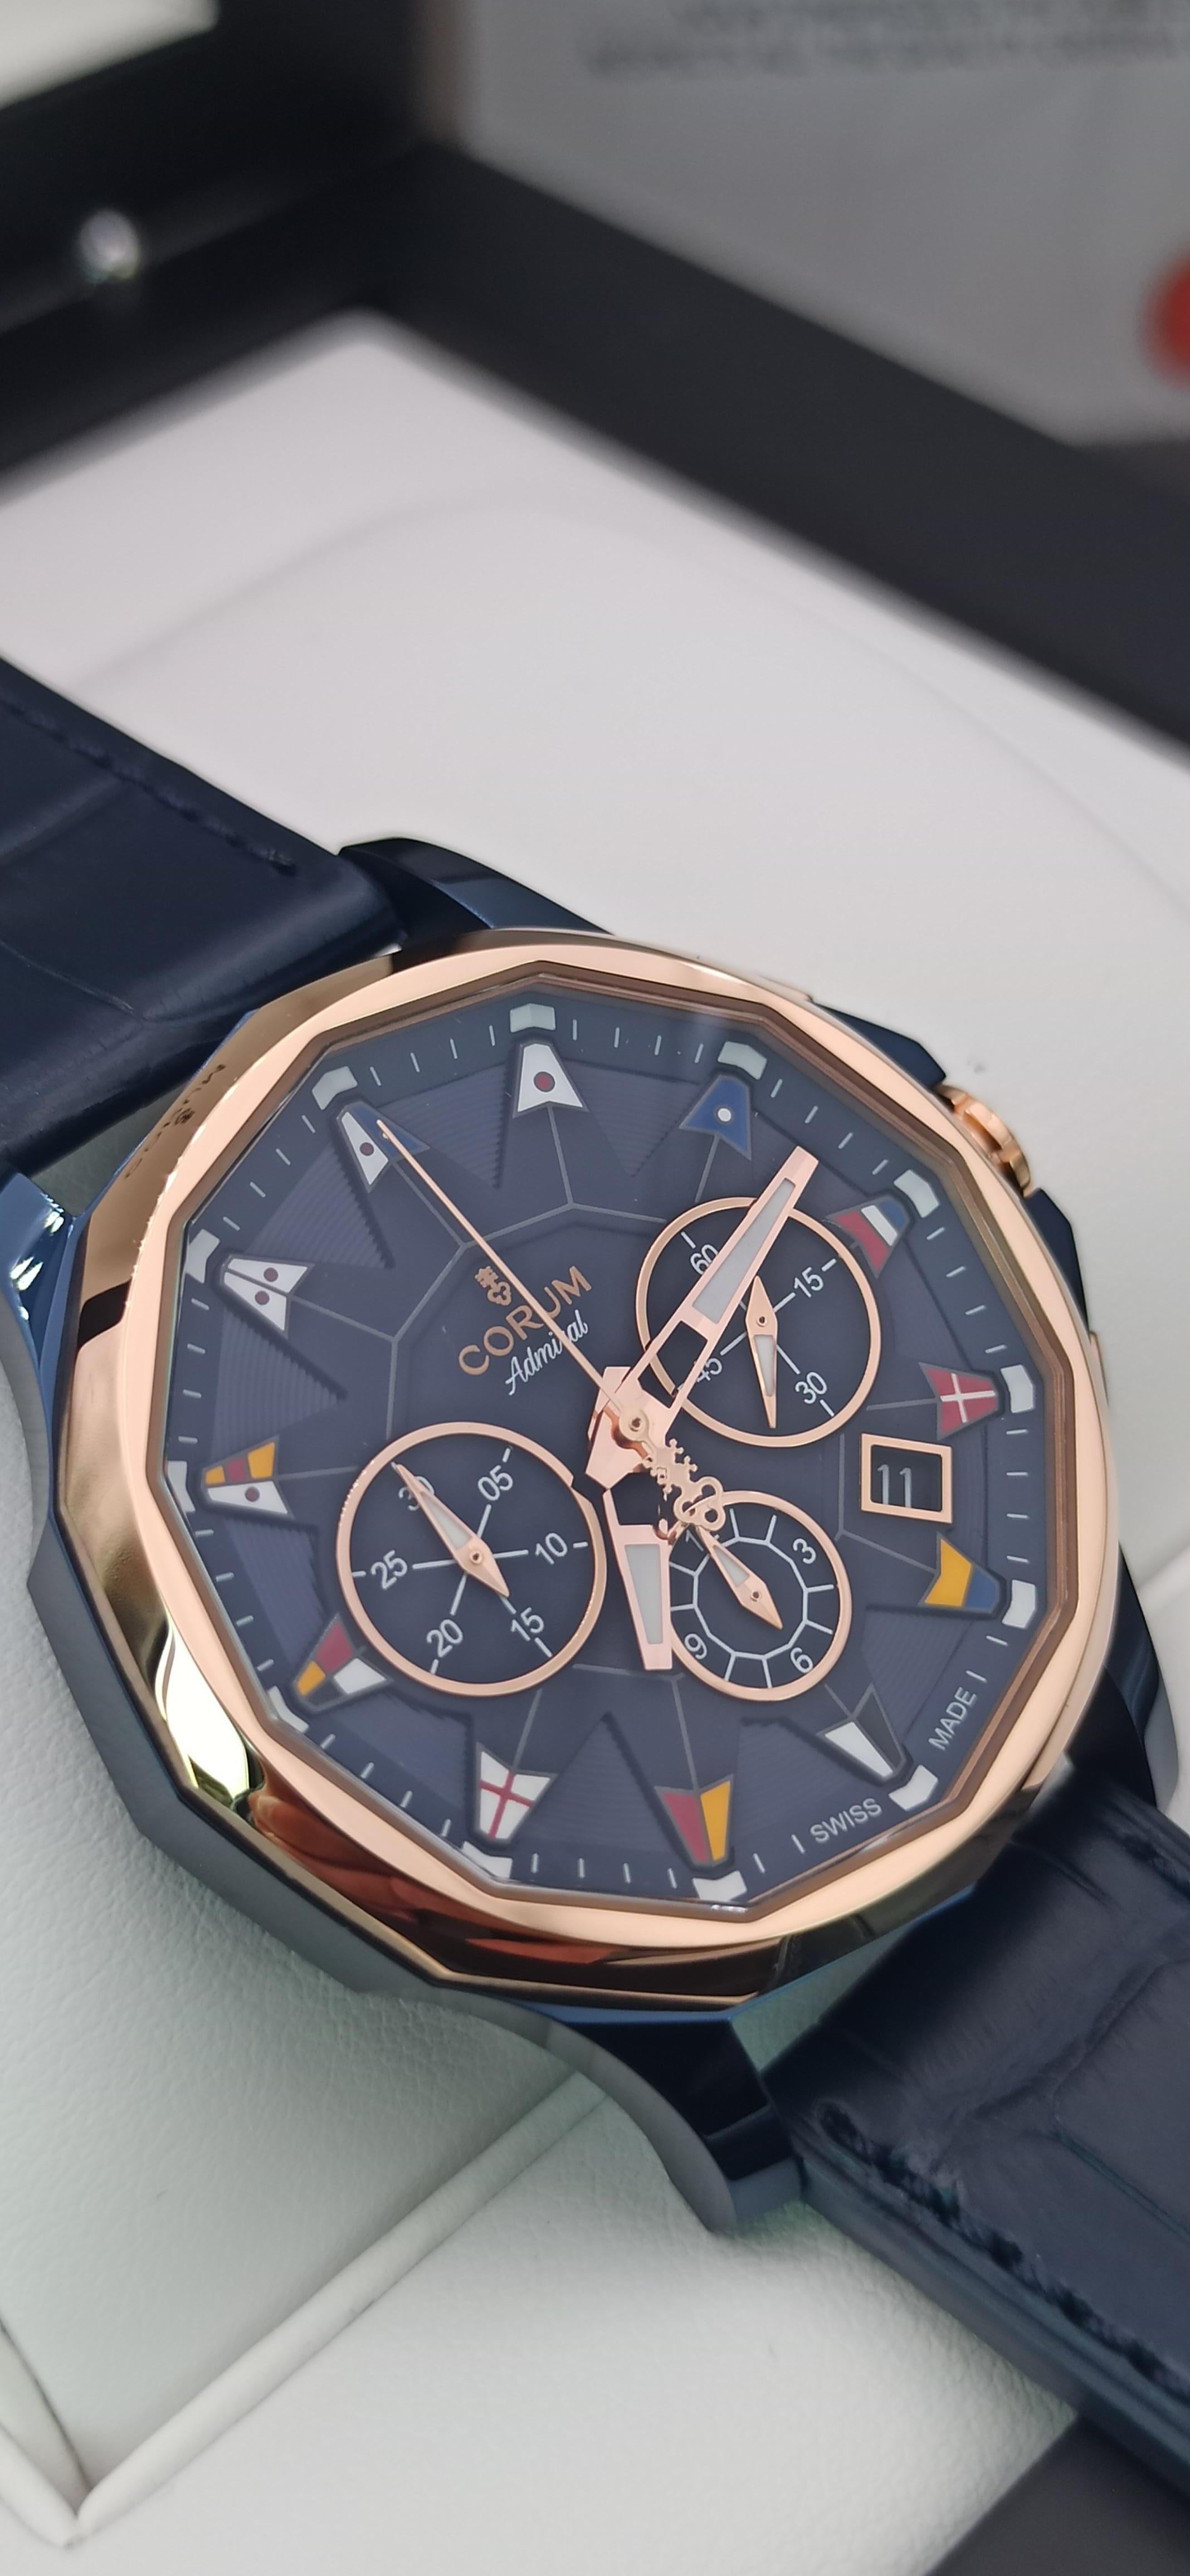 Corum Admiral Cup, Chronograph,  
18kt rose gold and PVD Steel case,  42 mm diameter,
Automatic Chronograph,  
Very nice CORUM watch made in  limited production 